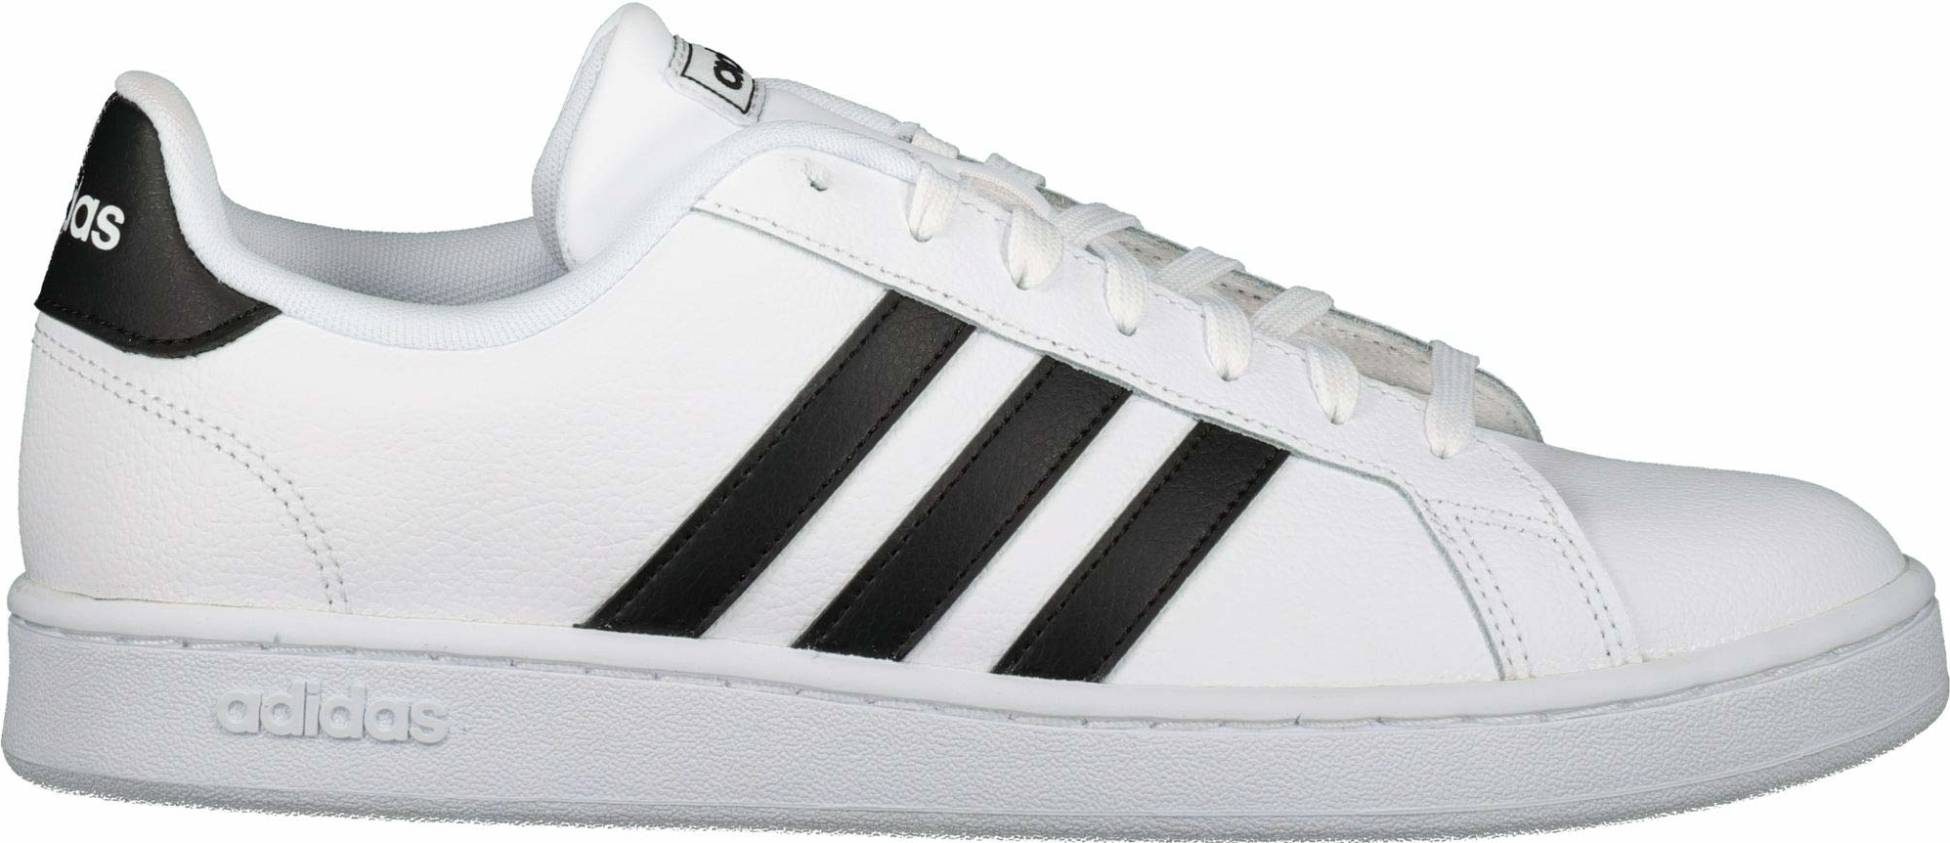 Adidas Grand Court sneakers in 20+ colors (only $45) | RunRepeat عيادة توث